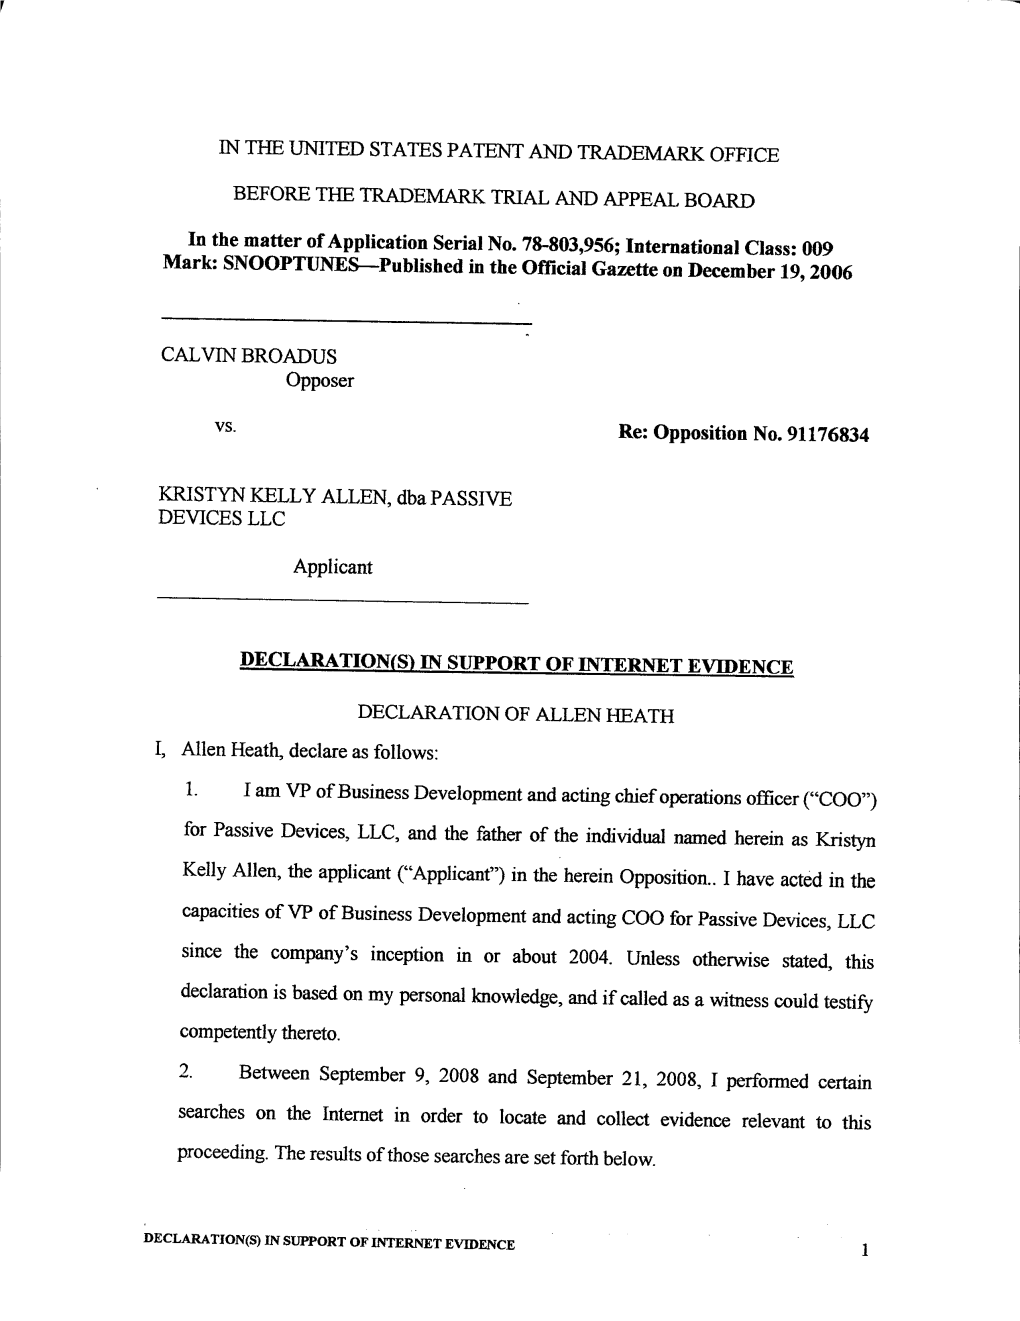 For Passive Devices, LLC, and the Father of the Individual Named Herein As Kristyn Kelly Allen, the Applicant (“Applicant”) in Theherein Opposition